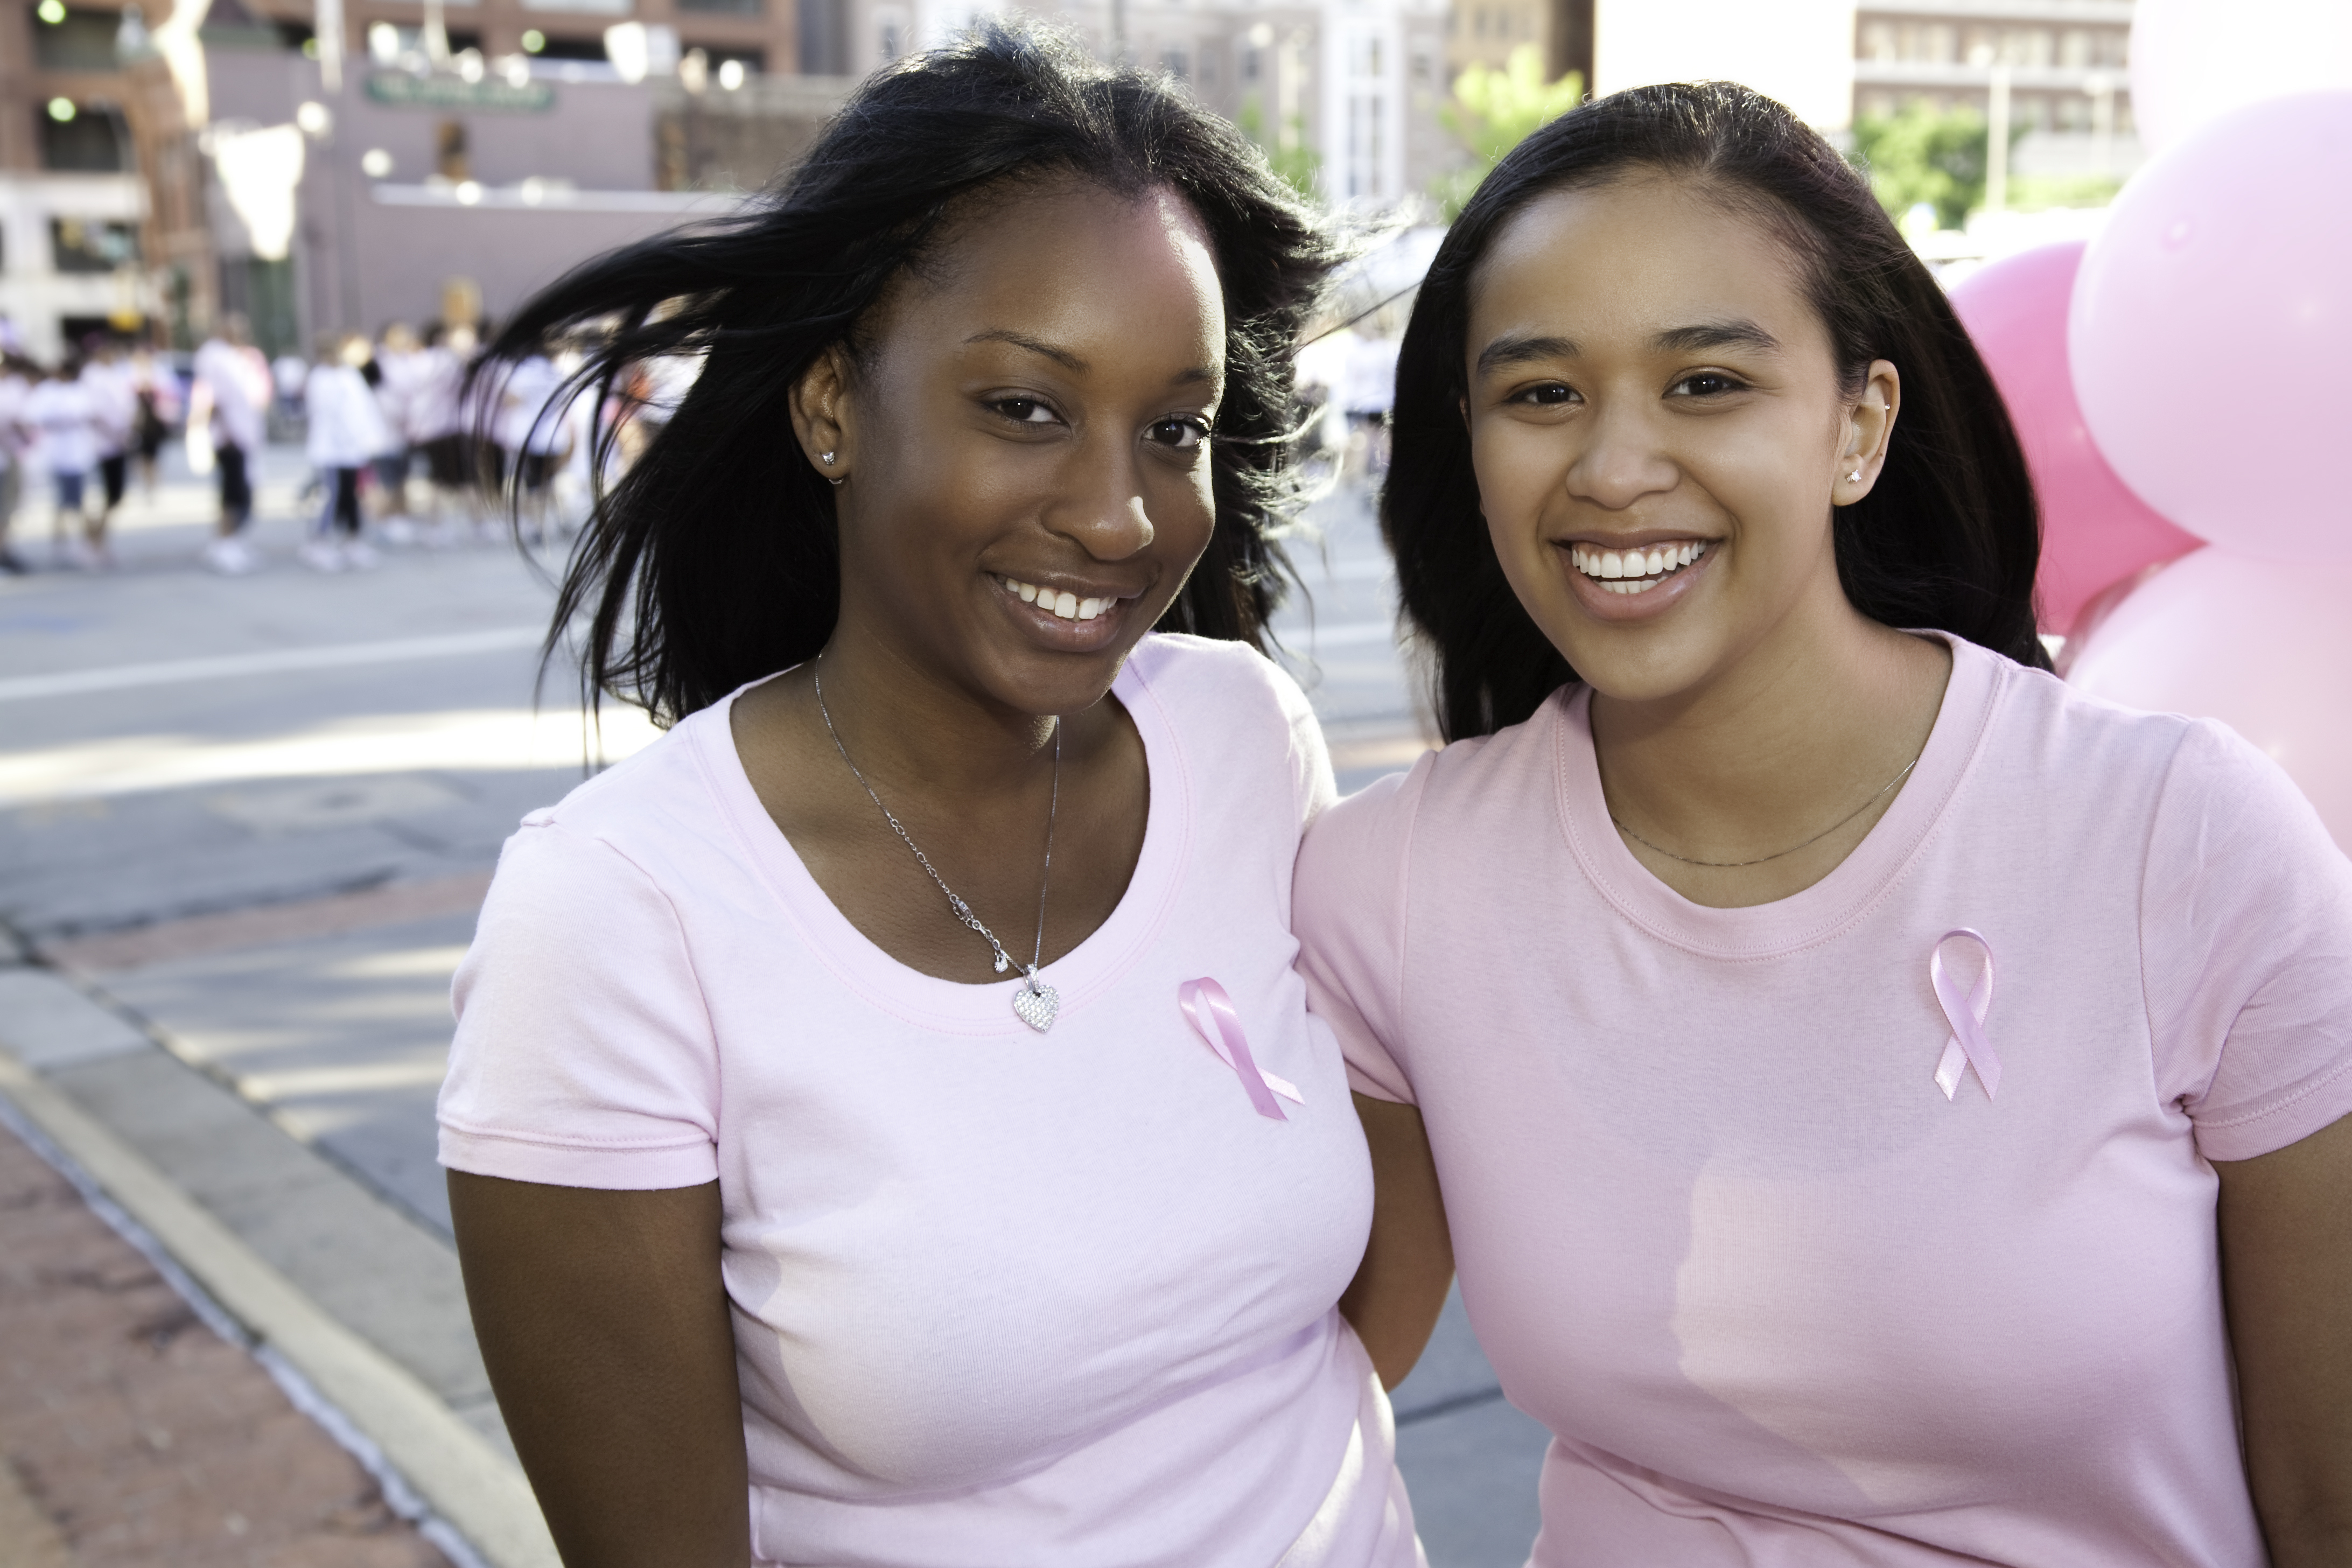 New study findings may help to explain a gap in mortality that exists between black and white women with breast cancer, and could lead to improved treatment approaches to help close it. [asiseeit/Getty Images]